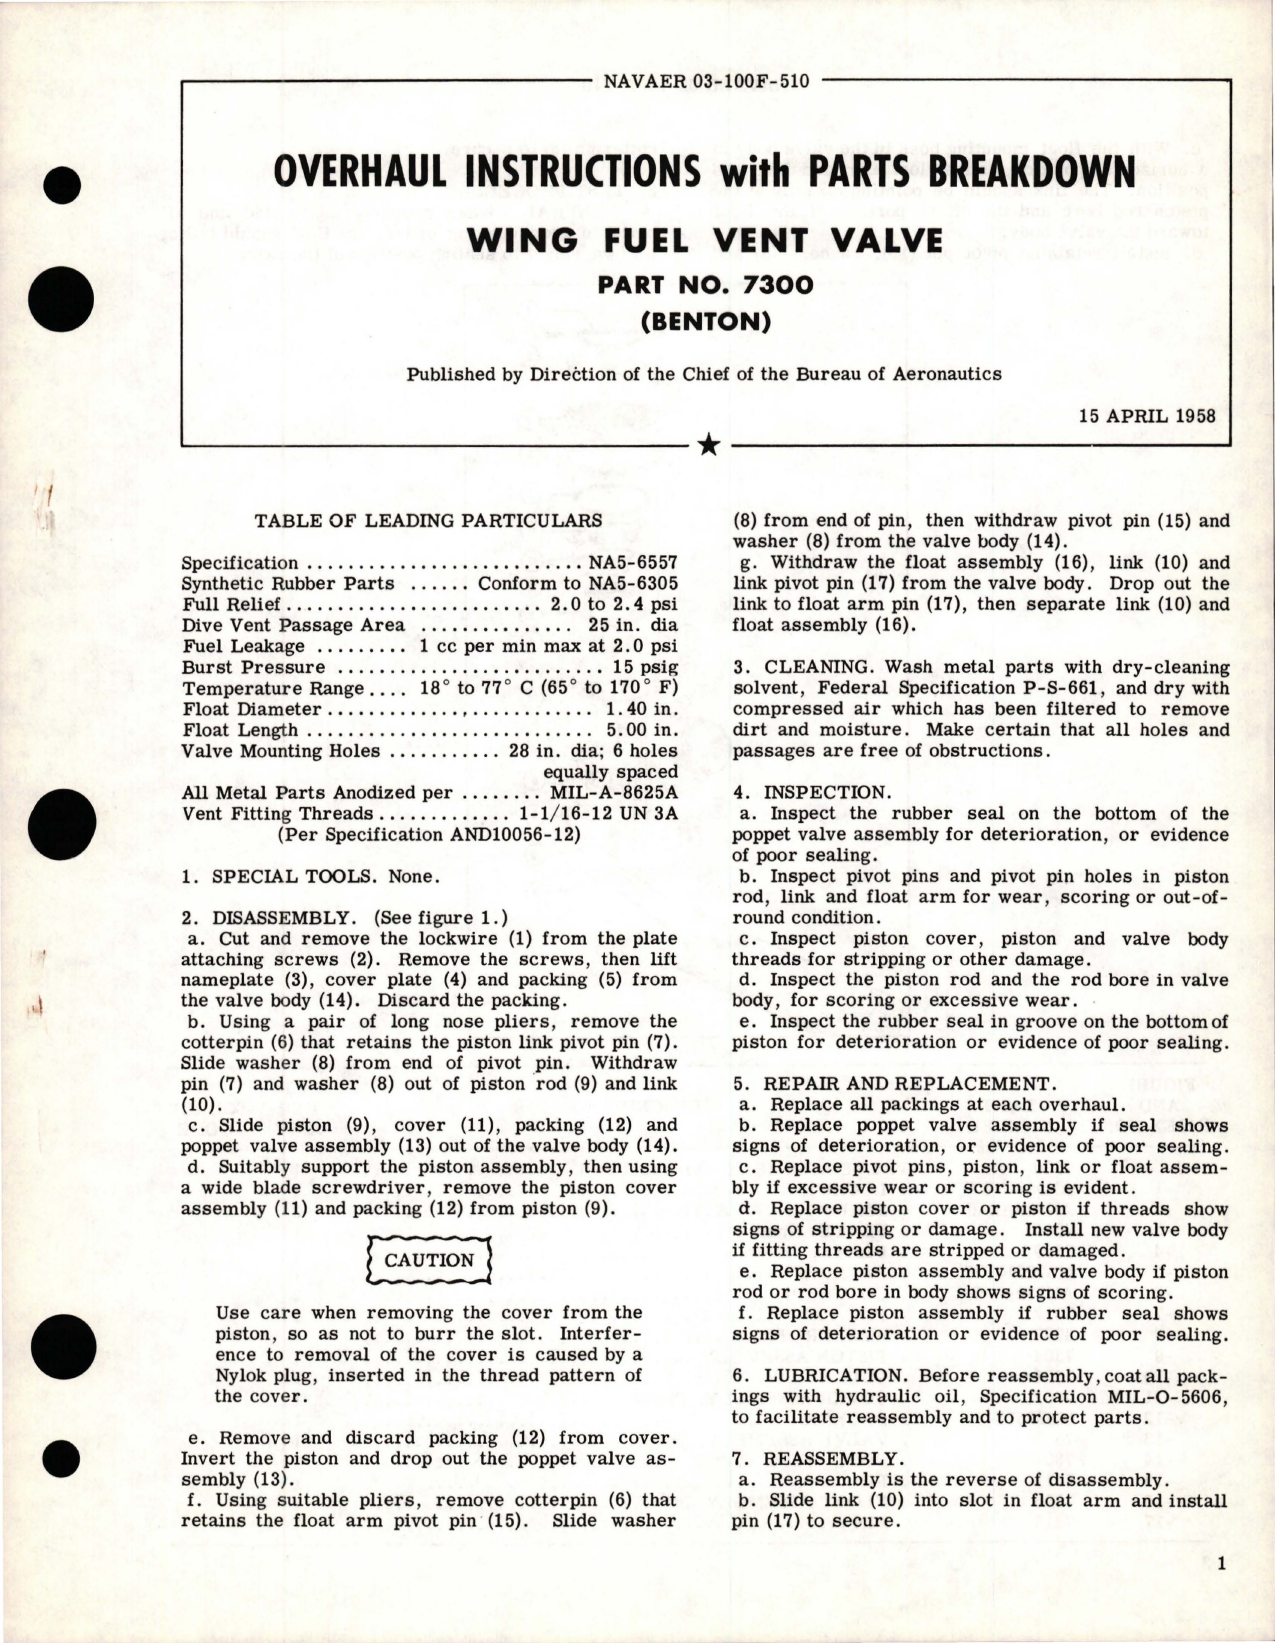 Sample page 1 from AirCorps Library document: Overhaul Instructions with Parts Breakdown for Wing Fuel Vent Valve - Part 7300